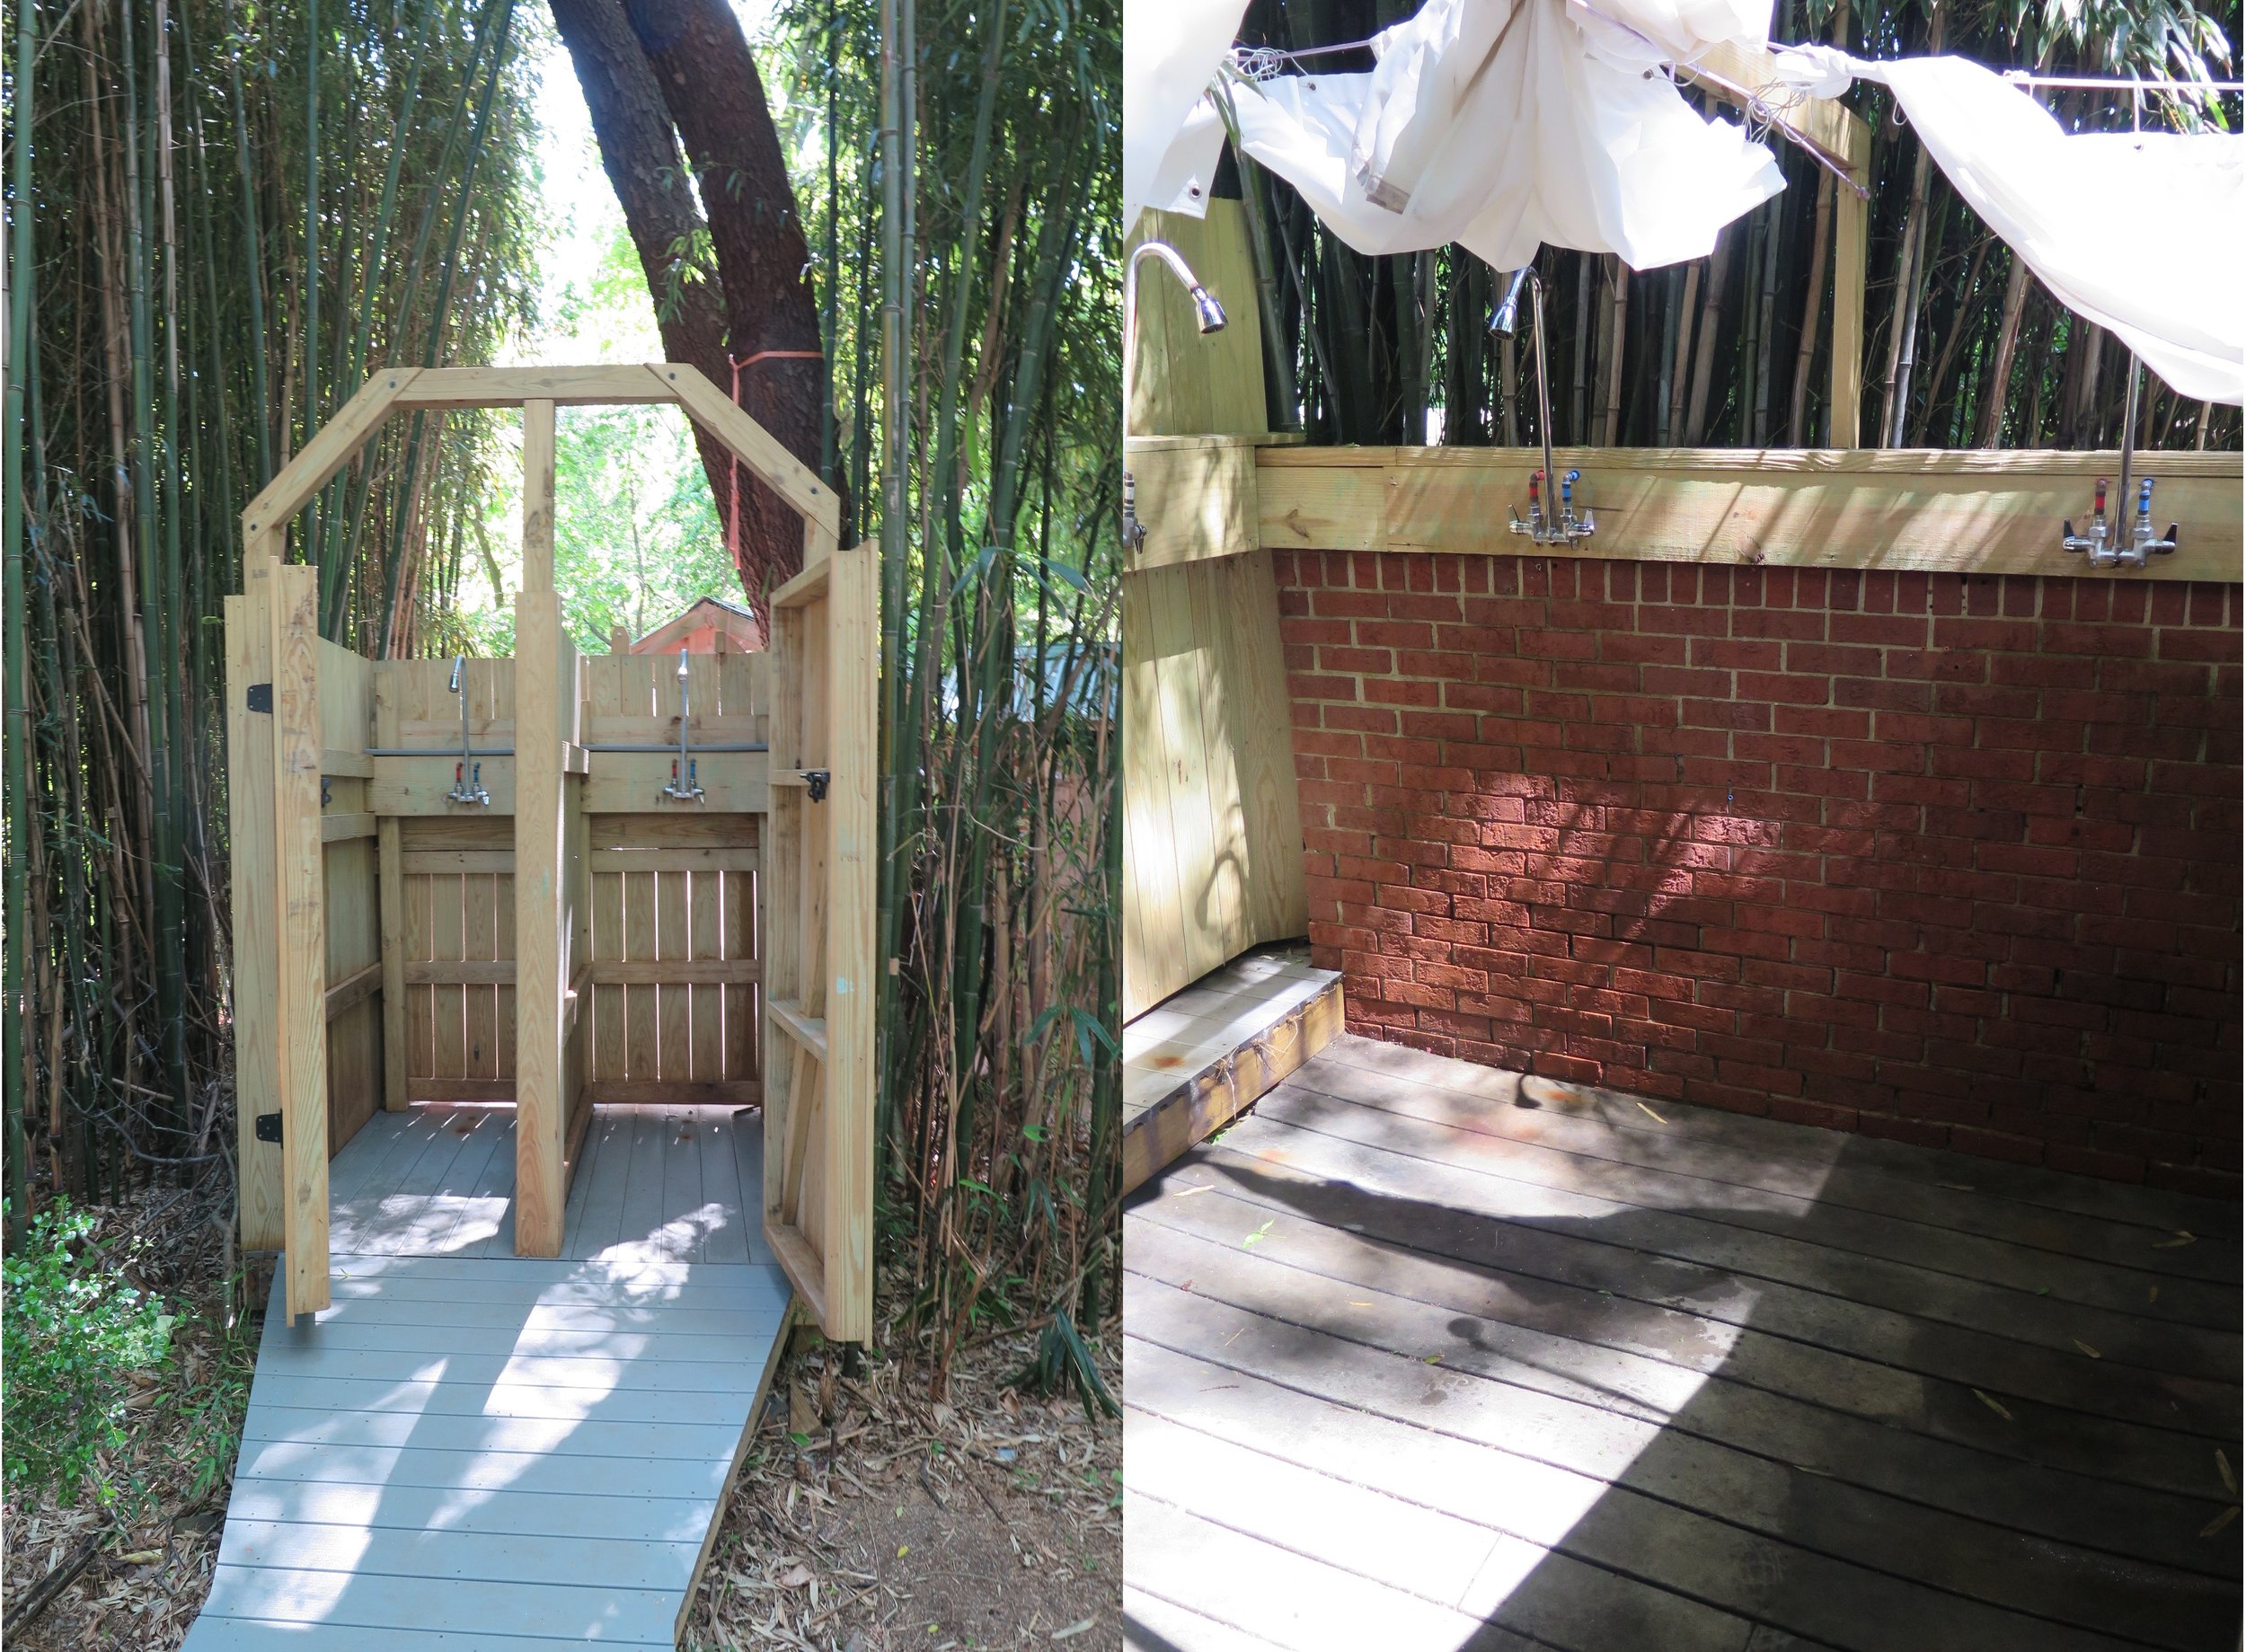 Open air showers offer private stalls or curtains